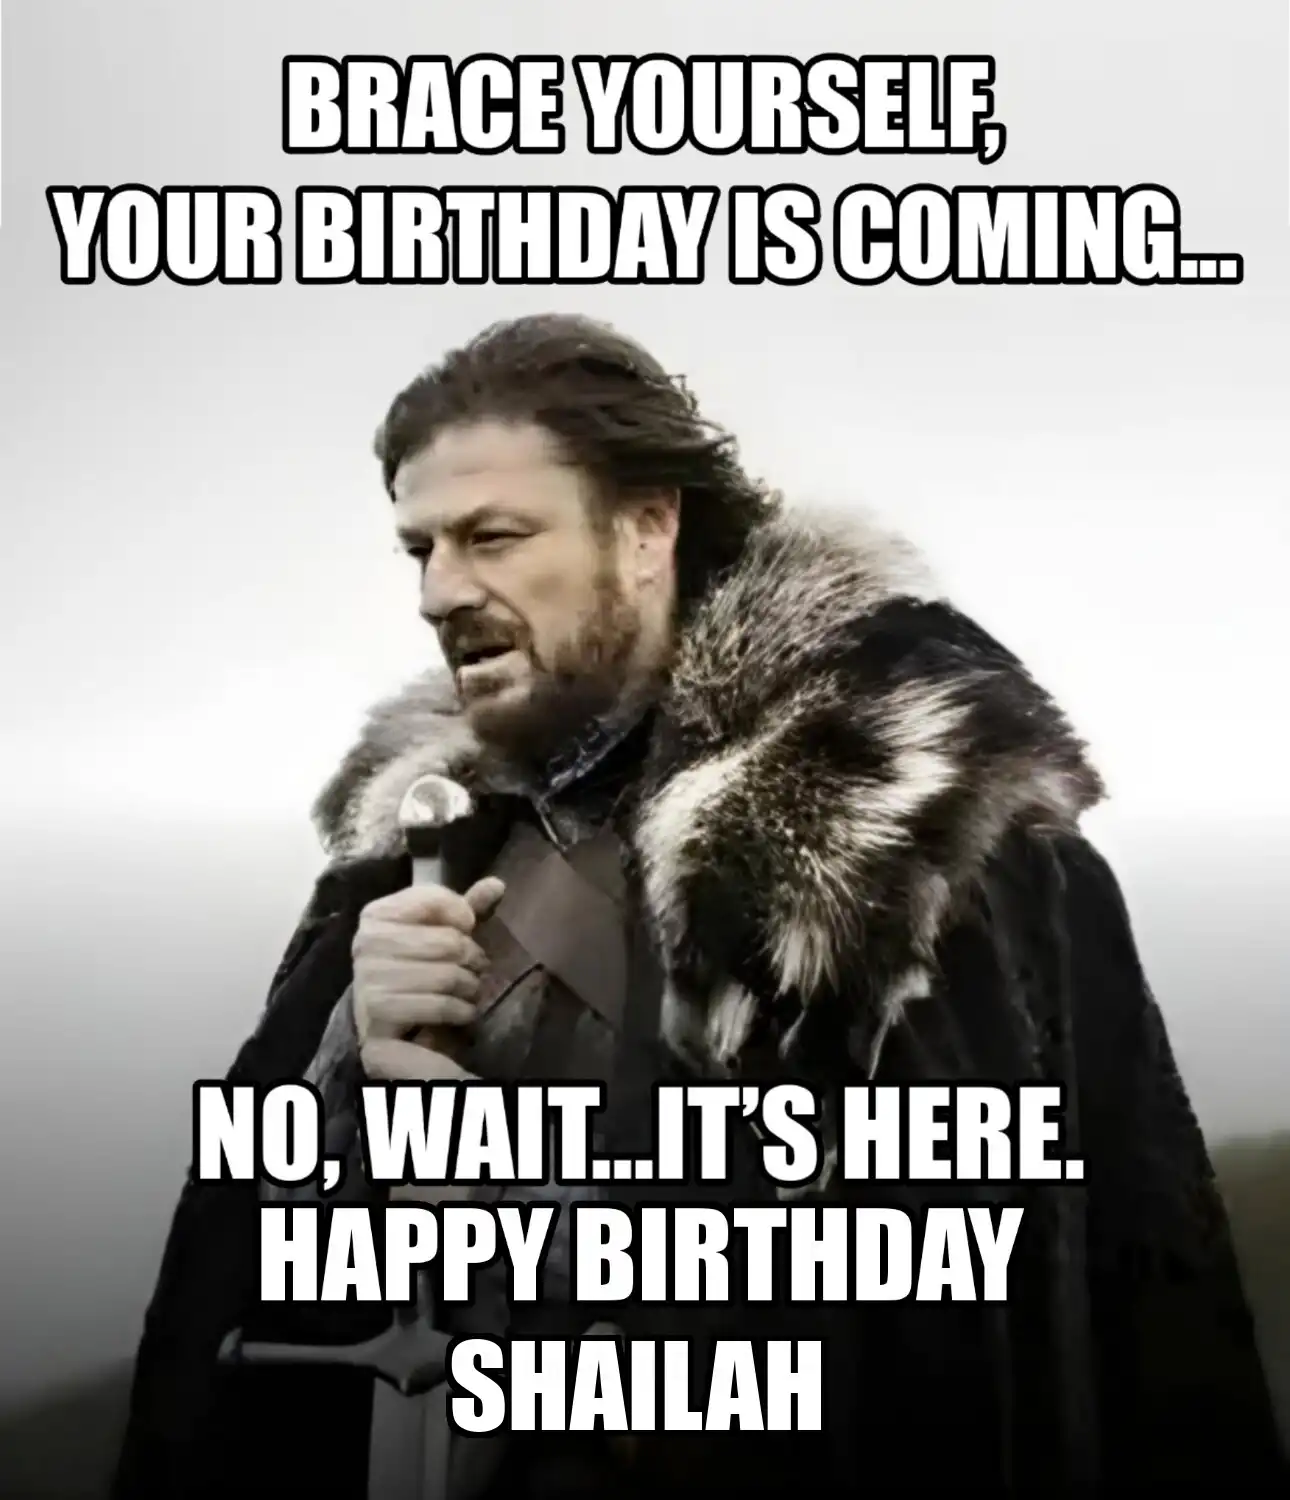 Happy Birthday Shailah Brace Yourself Your Birthday Is Coming Meme